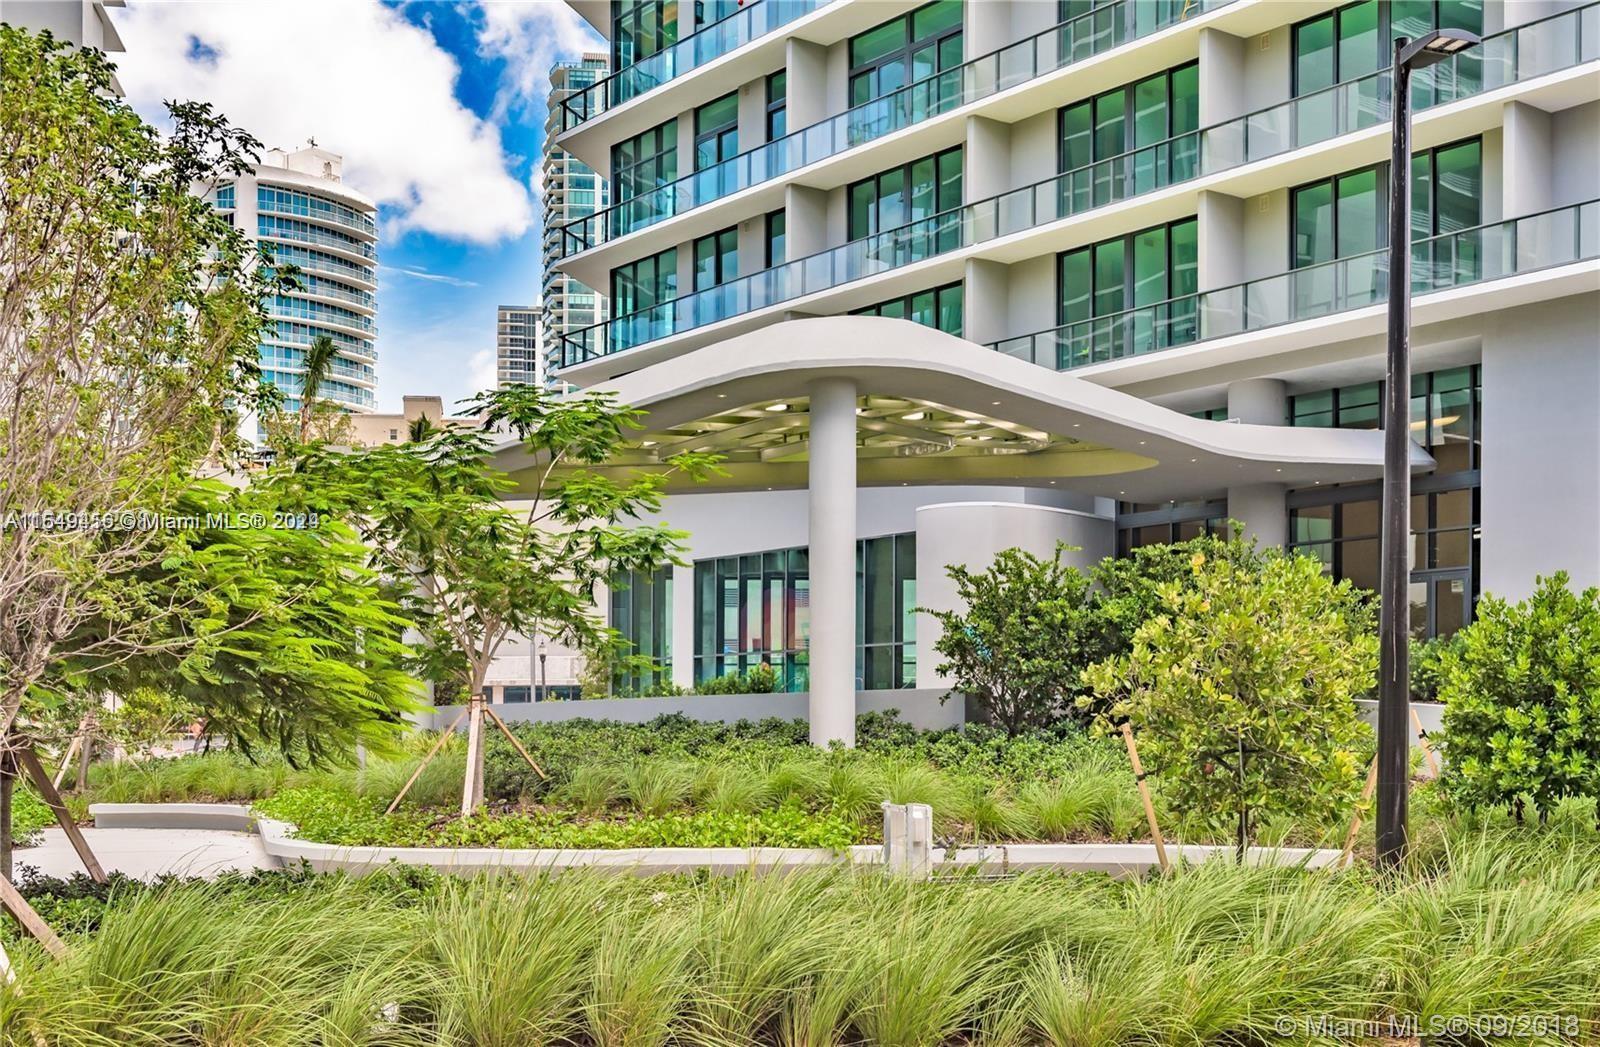 1 Bedroom unit with beautiful water views. Super functional, all furnished, brand new floors and very well located at the condo Paraiso Bayviews, a brand-new building situated in the bay-front neighborhood of Edgewater in Miami. Amenities include a state-of-the-art gym and spa, kid’s play room, business center, 3,000 sqft party room, 75-foot sunset pool, rooftop pool/spa, rooftop party room and BBQ area. Residents also have access to the Paraiso community park, marina, Michael Schwartz restaurant and Beach Club. Do not miss the opportunity to live in one of the most desirable condos in Edgewater.